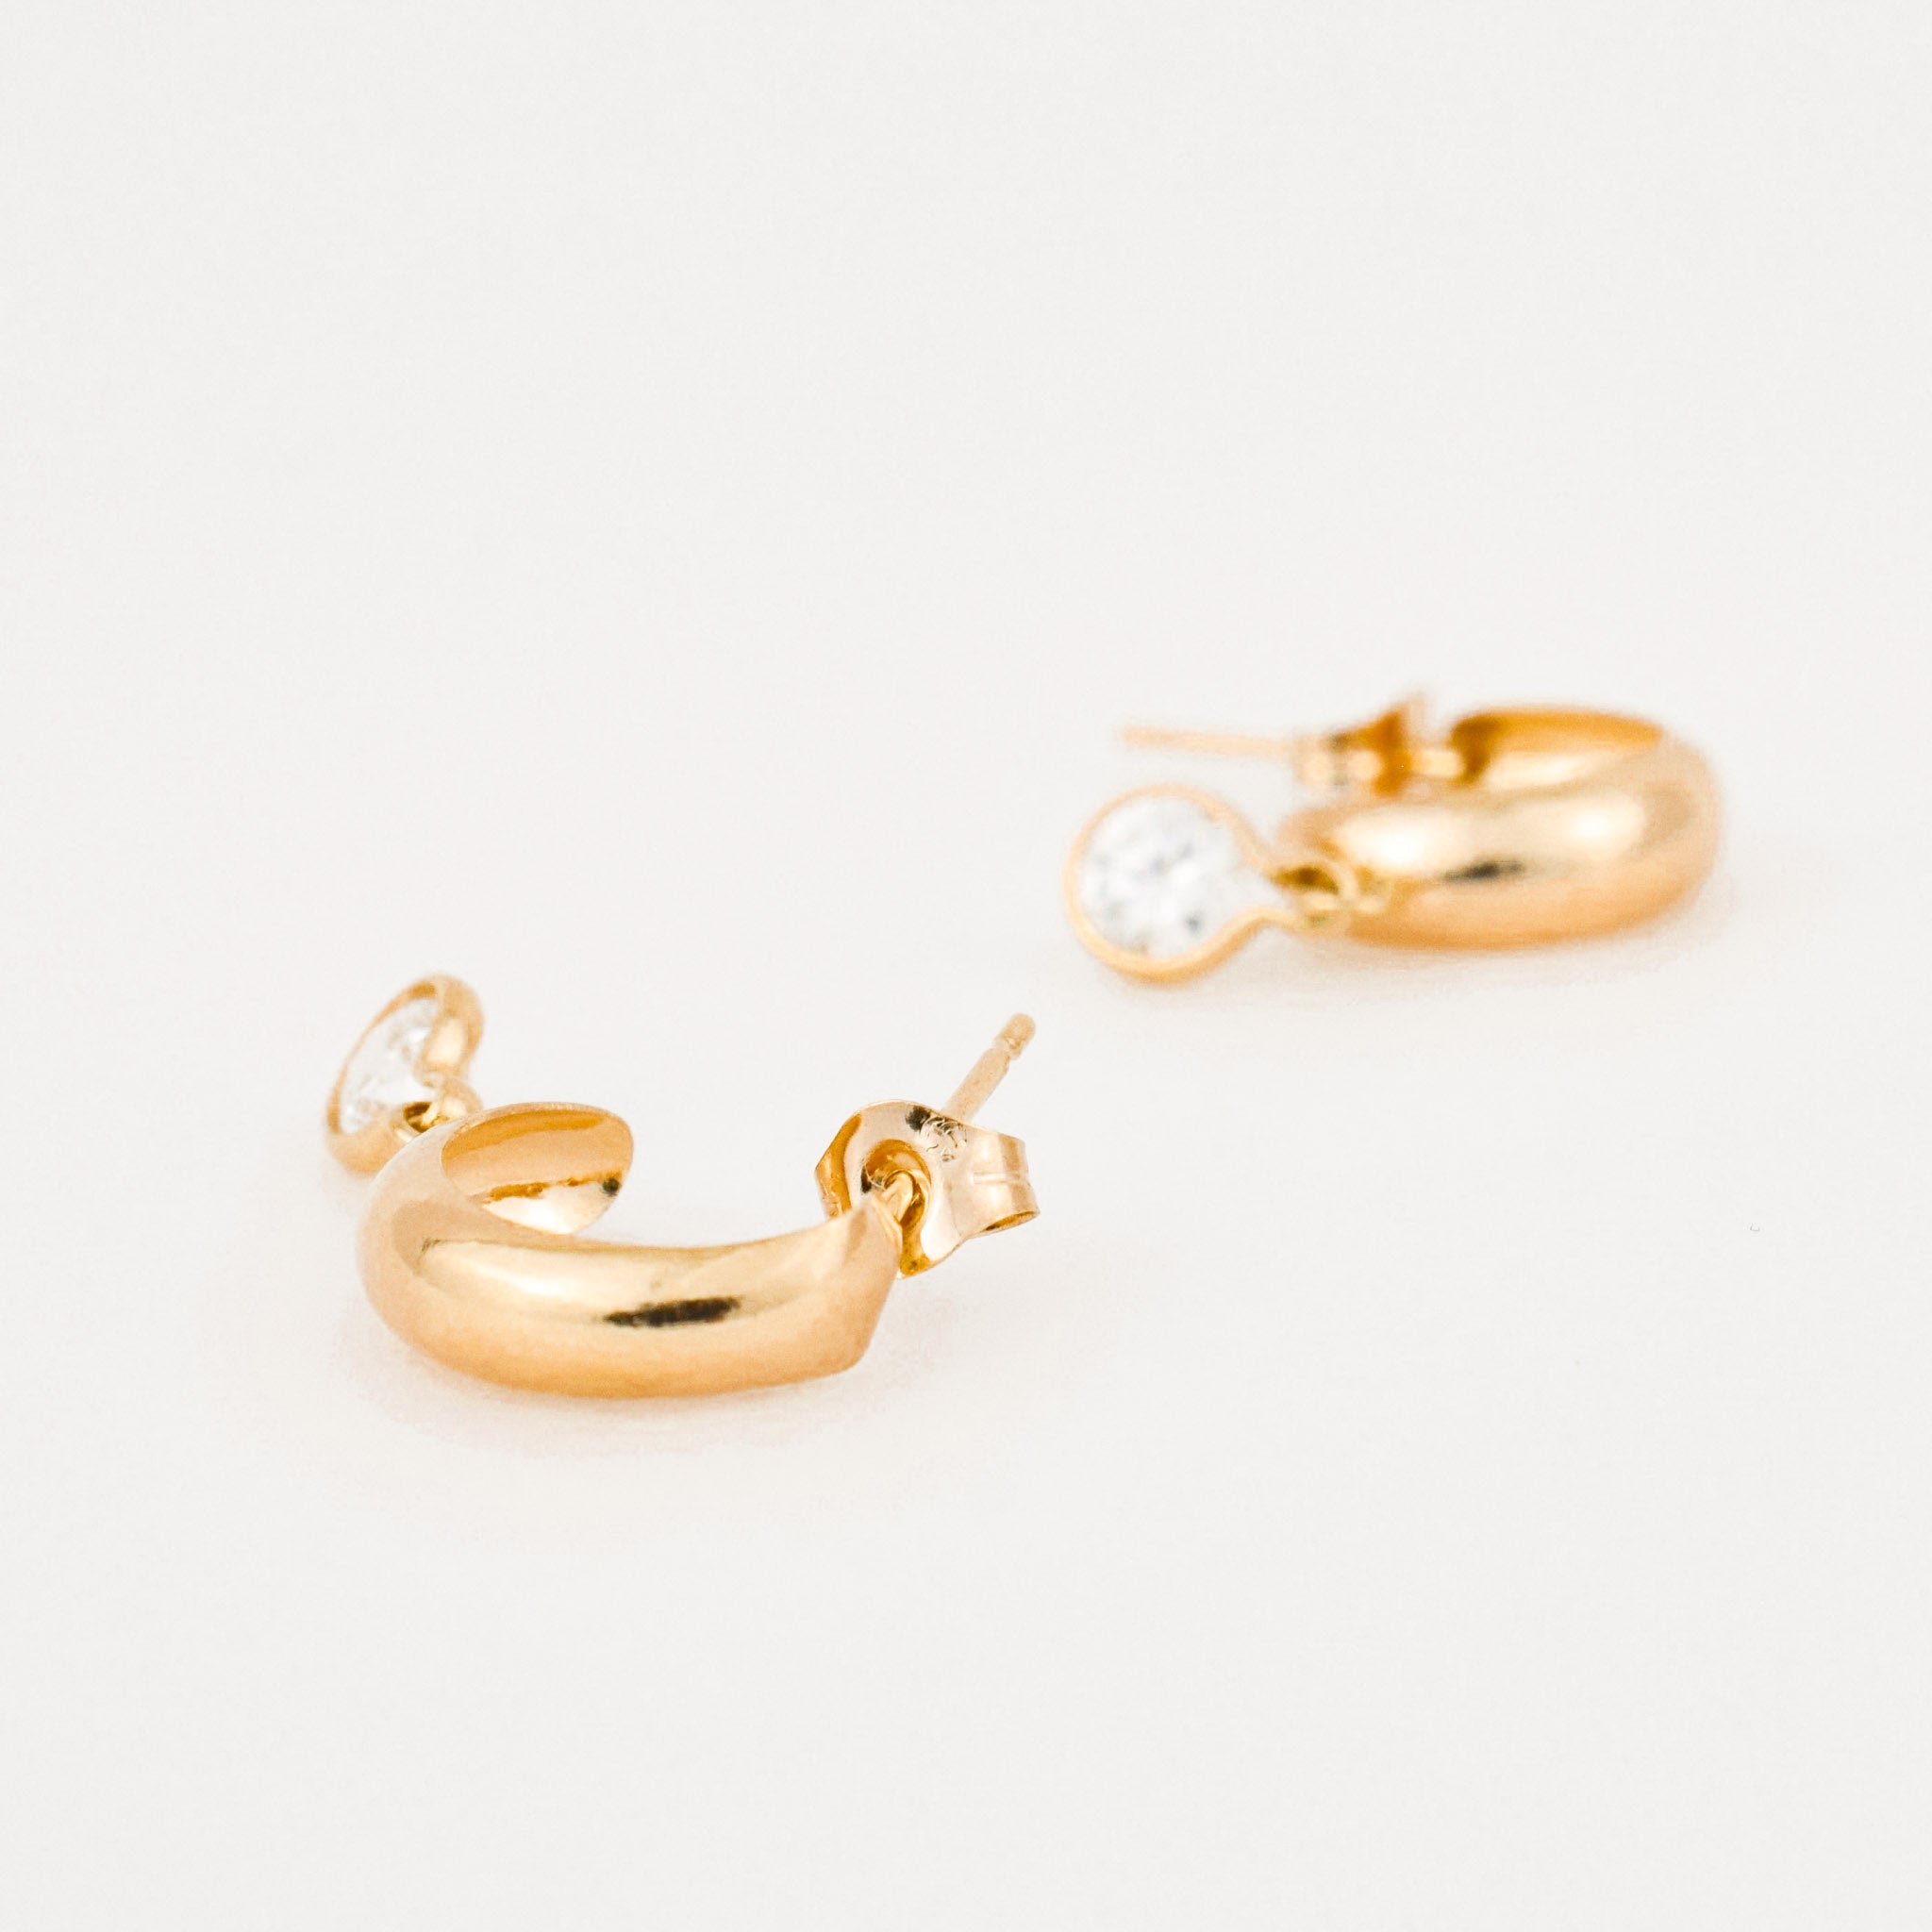 vintage gold half hoops with white stone earrings